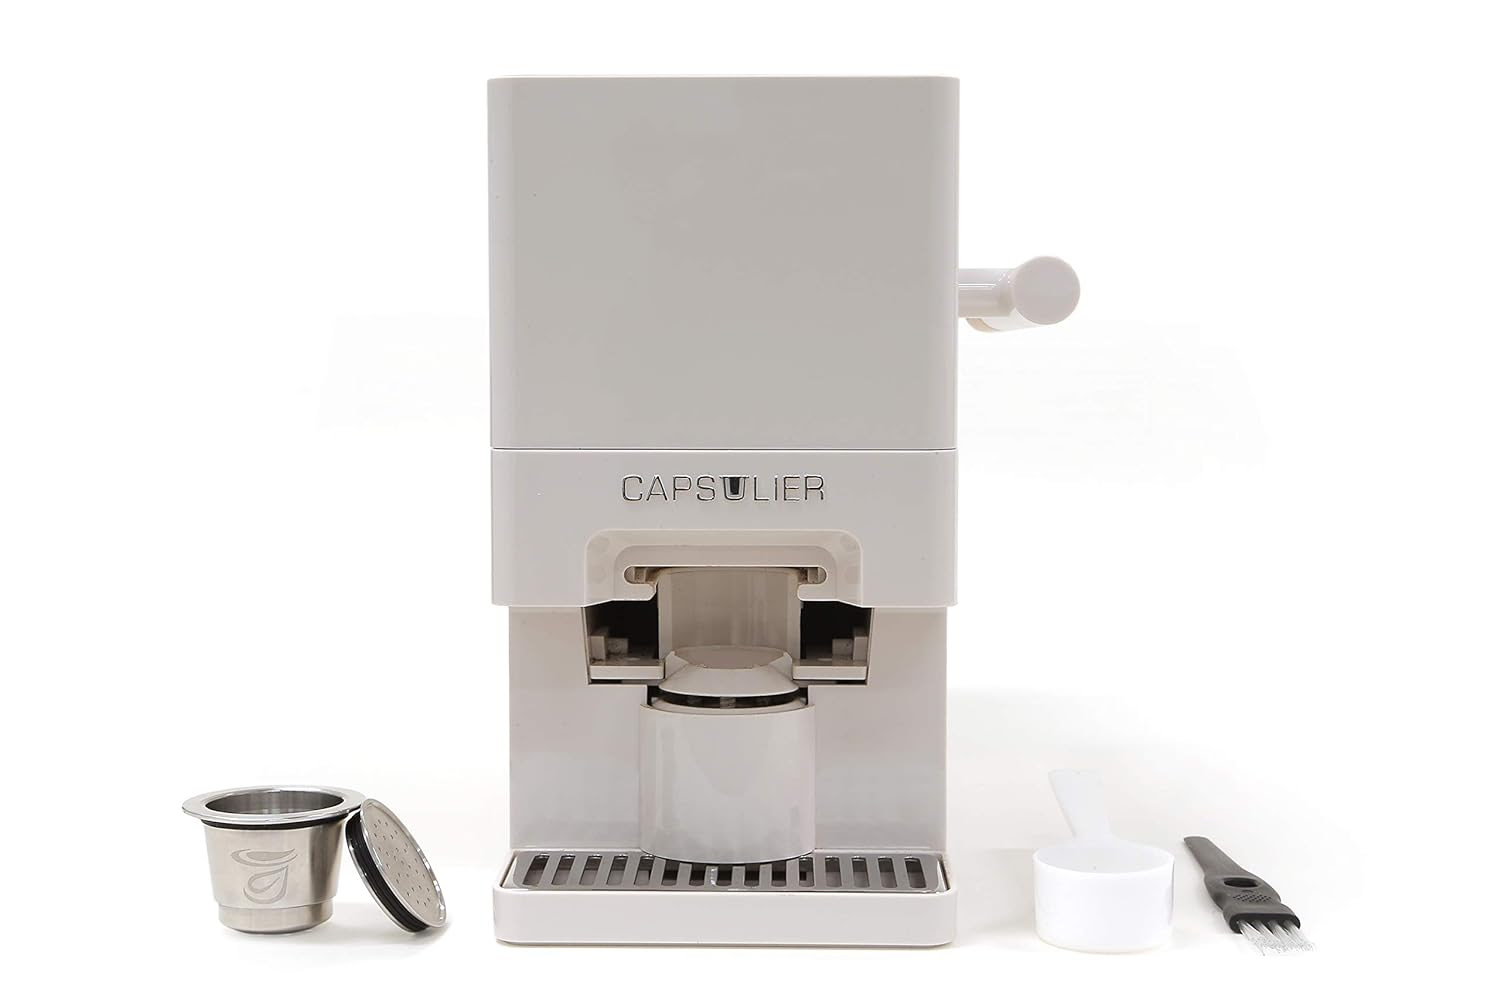 Capsulier - Better Coffee, No Waste.